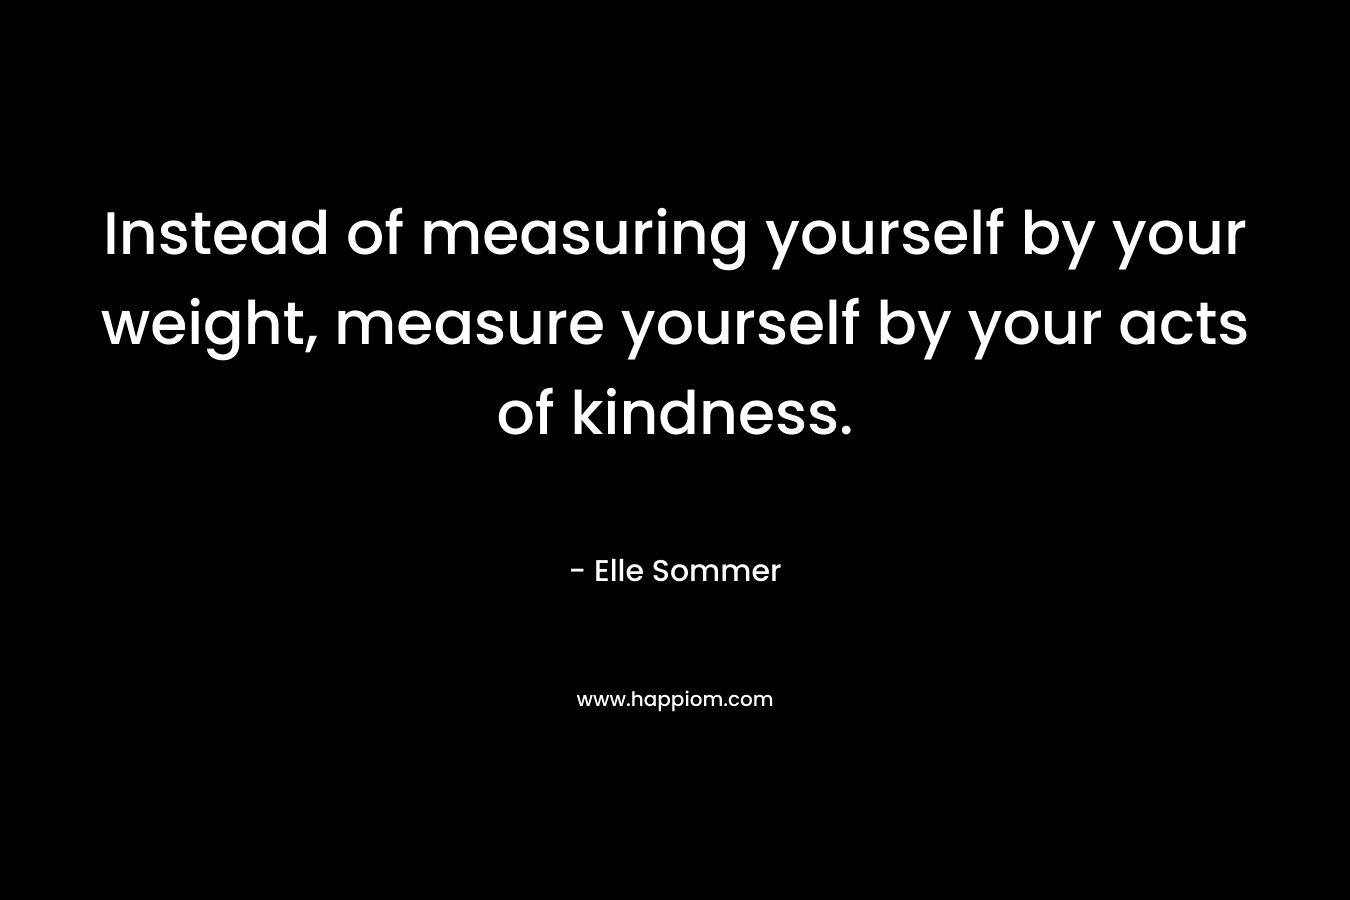 Instead of measuring yourself by your weight, measure yourself by your acts of kindness. – Elle Sommer